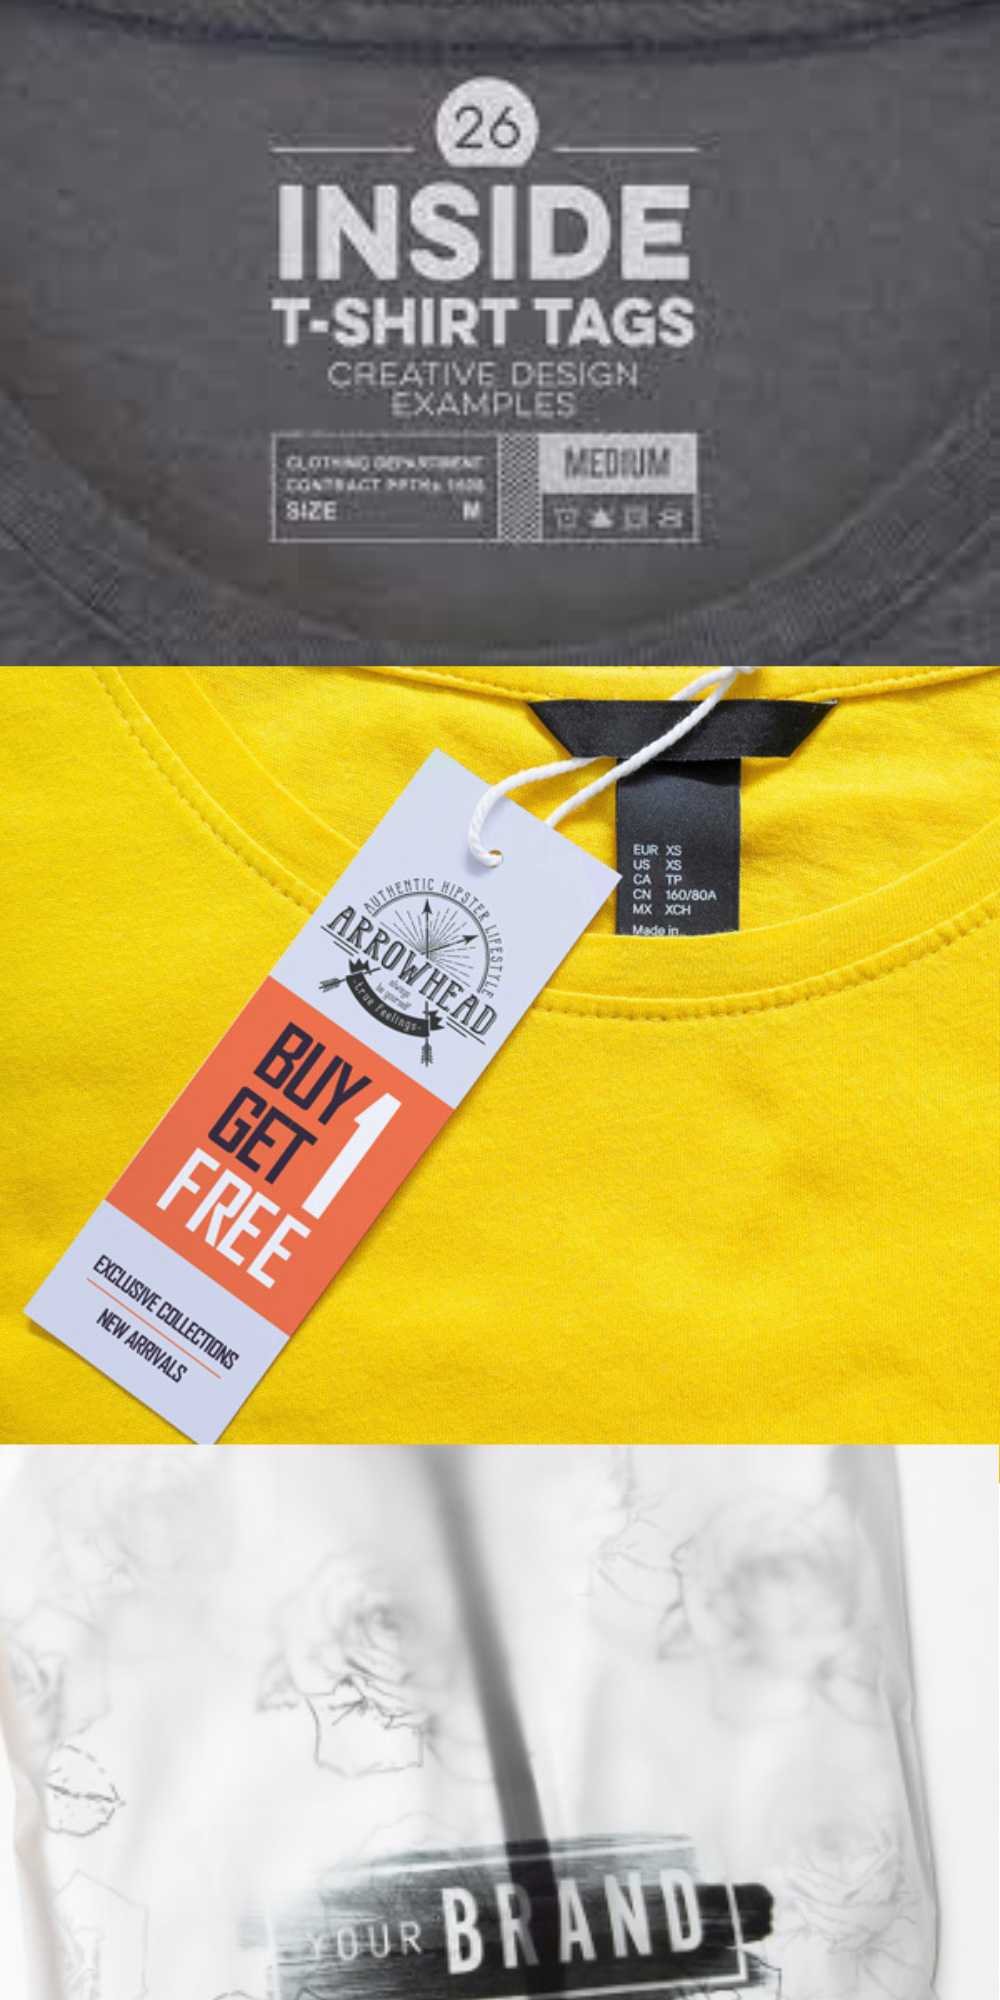 A yellow t-shirt with a tag that says inside t-shirt tags